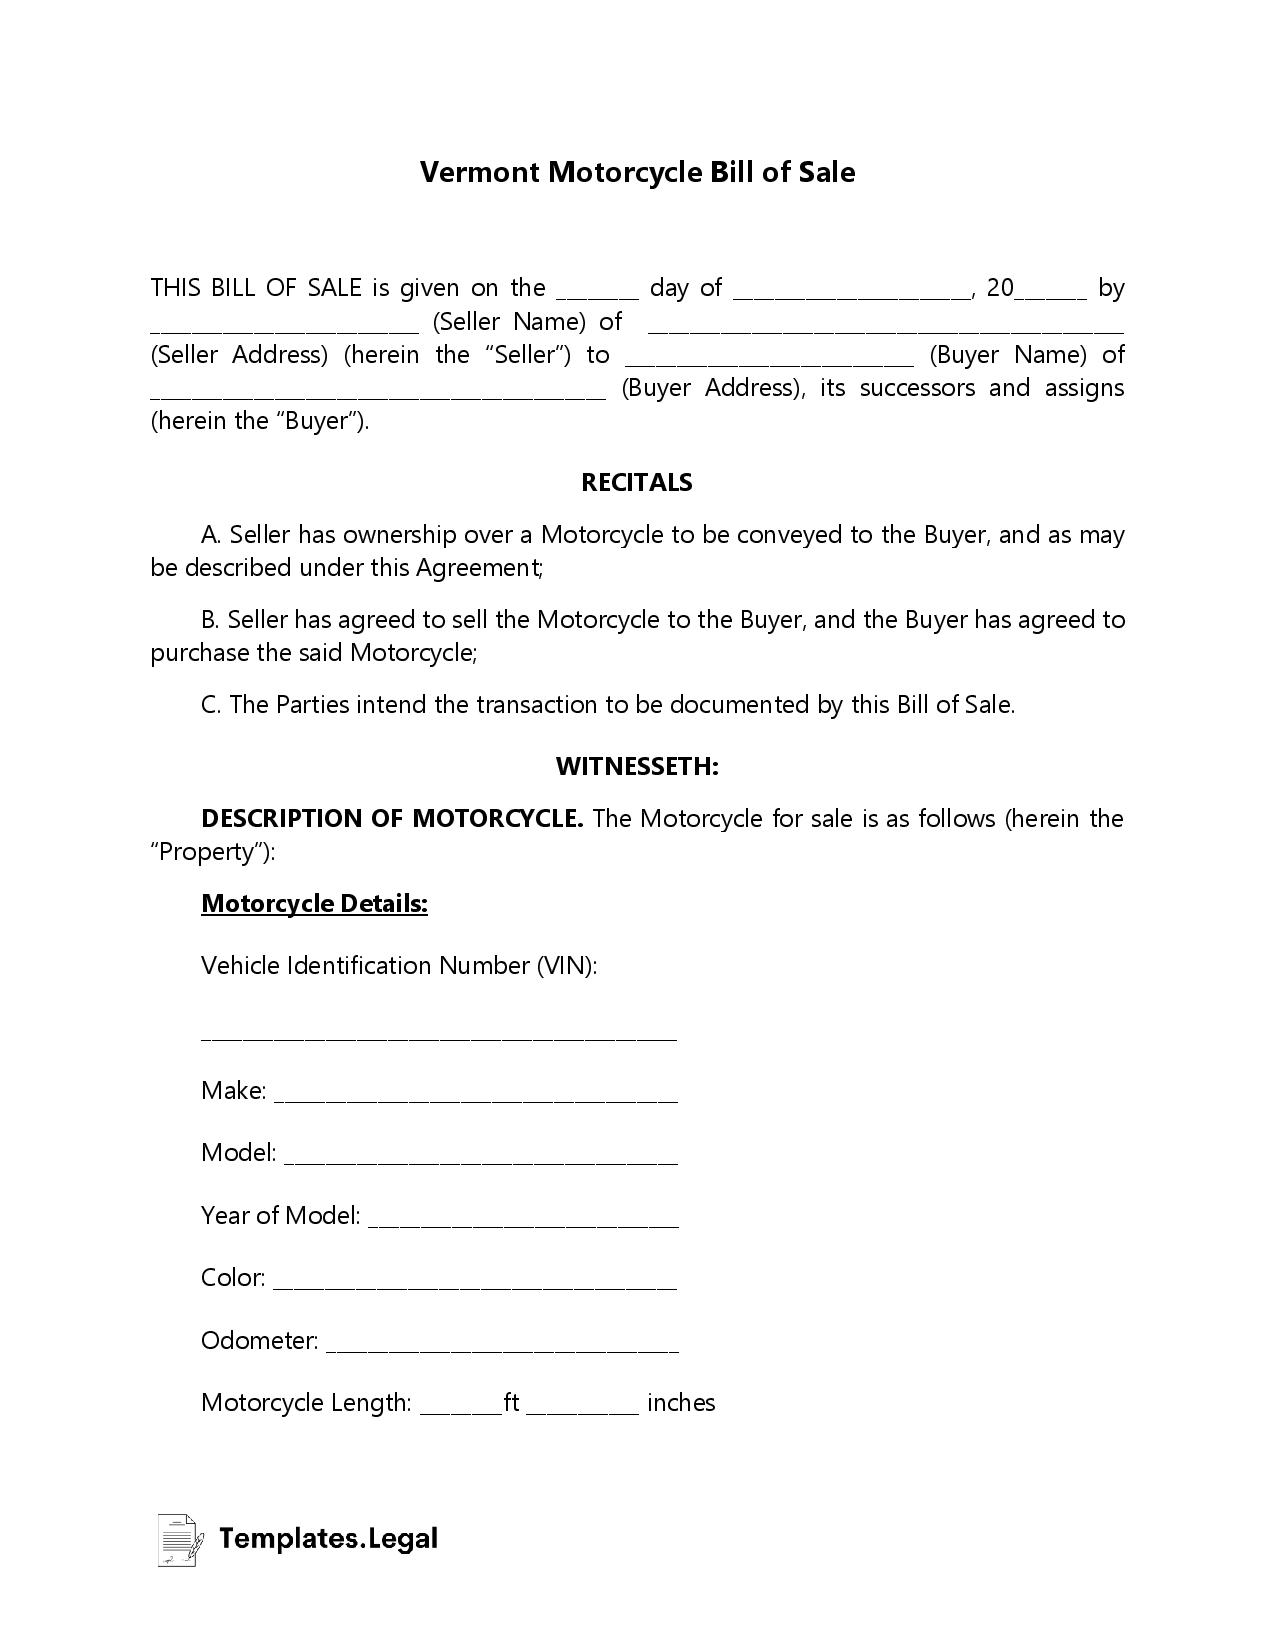 Vermont Motorcycle Bill of Sale - Templates.Legal